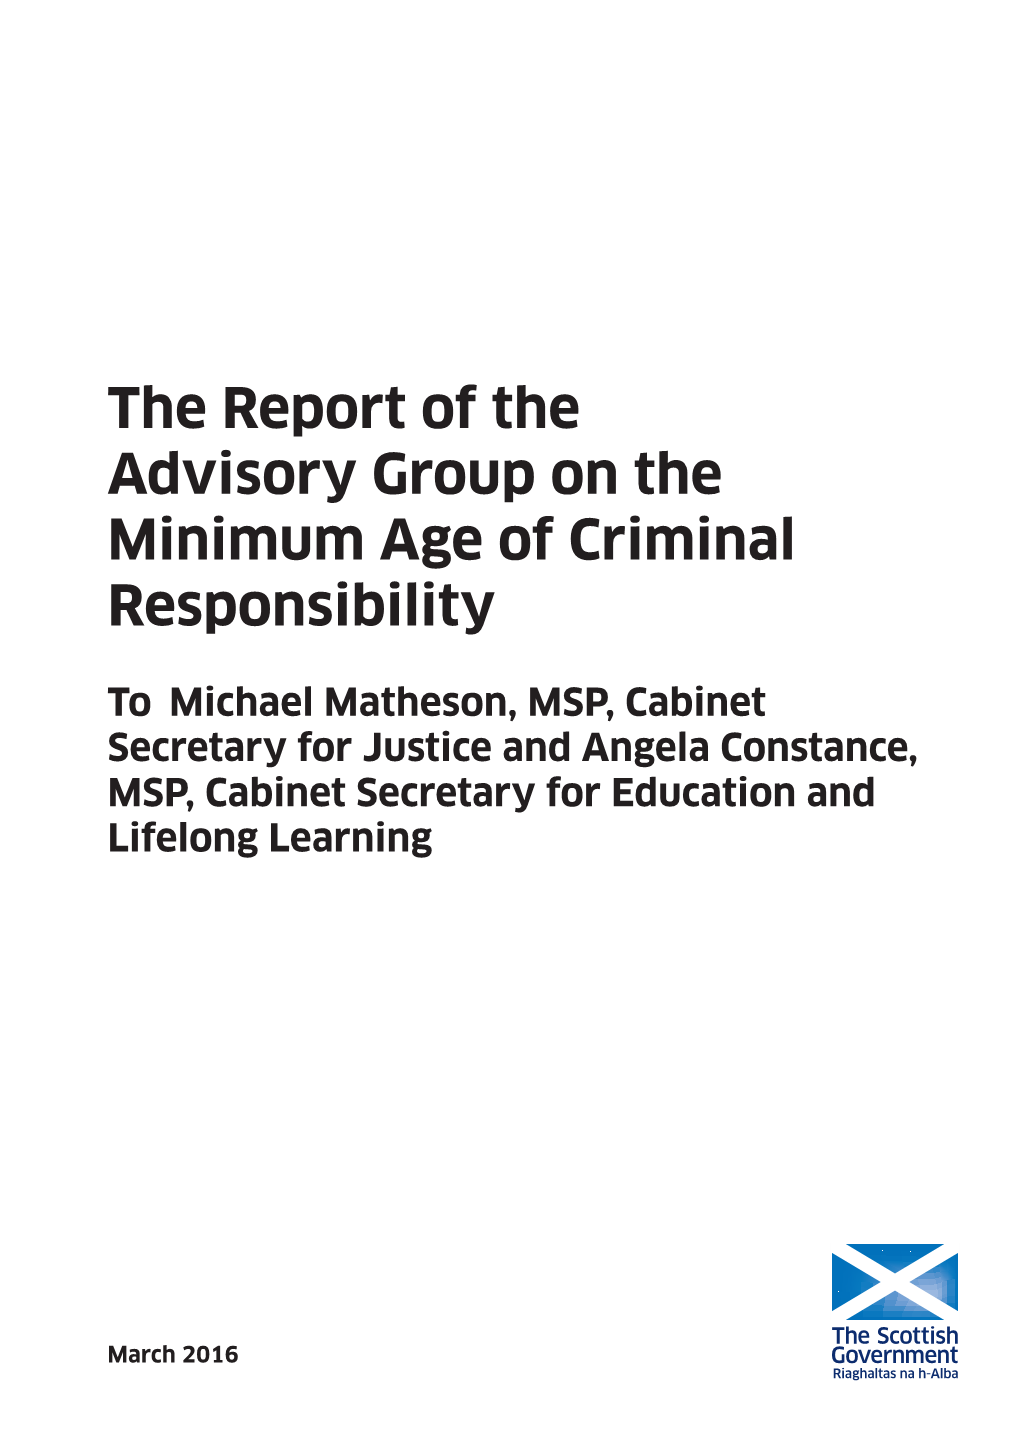 The Report of the Advisory Group on the Minimum Age of Criminal Responsibility